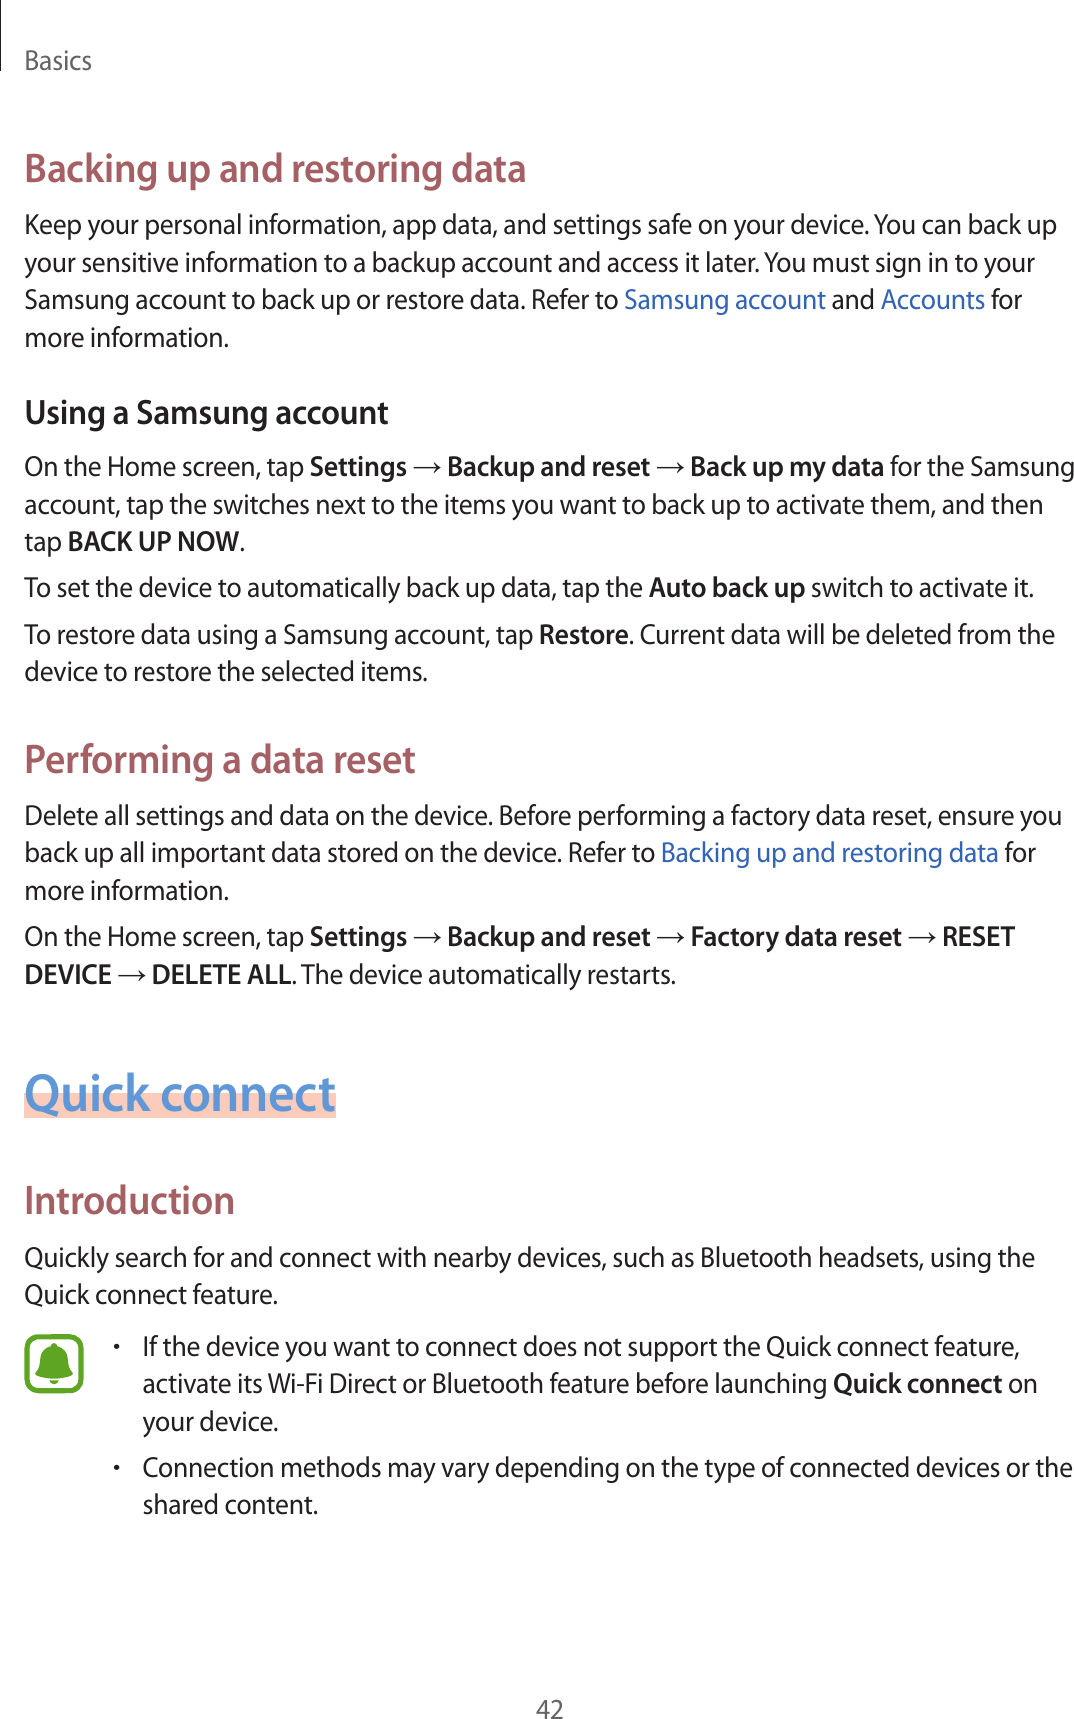 Basics42Backing up and restoring dataKeep your personal information, app data, and settings safe on your device. You can back up your sensitive information to a backup account and access it later. You must sign in to your Samsung account to back up or restore data. Refer to Samsung account and Accounts for more information.Using a Samsung accountOn the Home screen, tap Settings → Backup and reset → Back up my data for the Samsung account, tap the switches next to the items you want to back up to activate them, and then tap BACK UP NOW.To set the device to automatically back up data, tap the Auto back up switch to activate it.To restore data using a Samsung account, tap Restore. Current data will be deleted from the device to restore the selected items.Performing a data resetDelete all settings and data on the device. Before performing a factory data reset, ensure you back up all important data stored on the device. Refer to Backing up and restoring data for more information.On the Home screen, tap Settings → Backup and reset → Factory data reset → RESET DEVICE → DELETE ALL. The device automatically restarts.Quick connectIntroductionQuickly search for and connect with nearby devices, such as Bluetooth headsets, using the Quick connect feature.•If the device you want to connect does not support the Quick connect feature, activate its Wi-Fi Direct or Bluetooth feature before launching Quick connect on your device.•Connection methods may vary depending on the type of connected devices or the shared content.